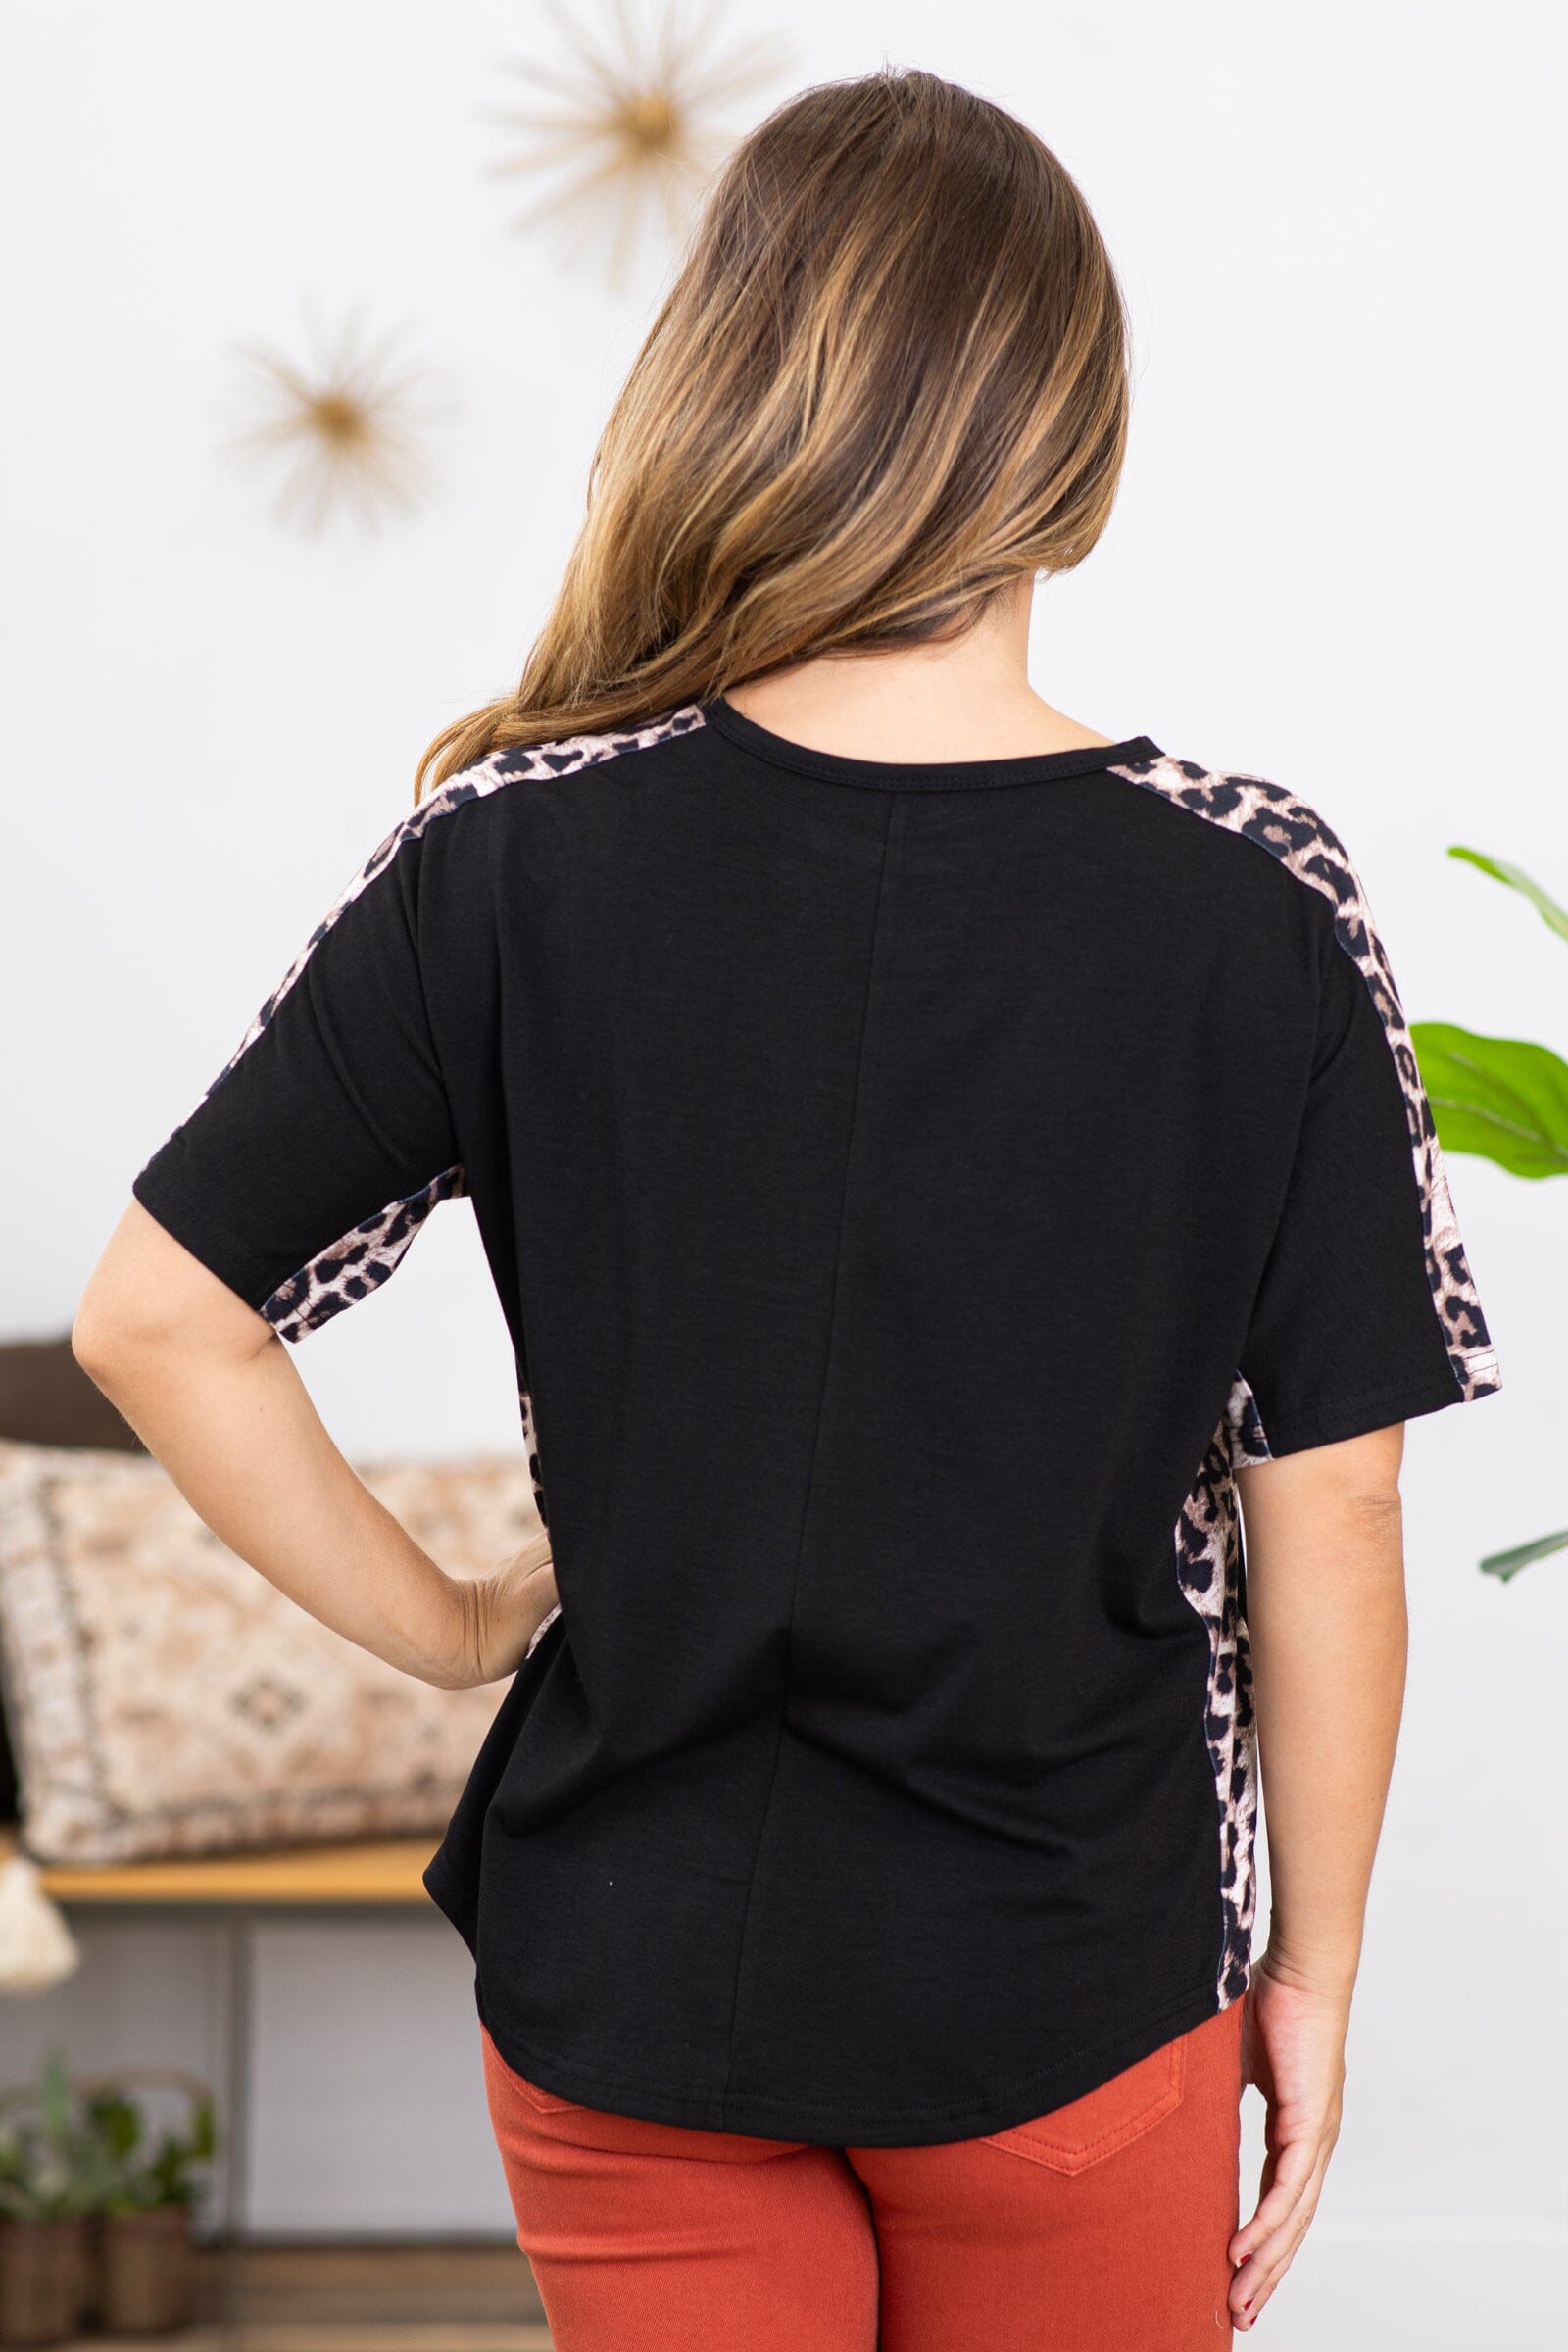 Black Short Sleeve Top With Animal Print - Filly Flair